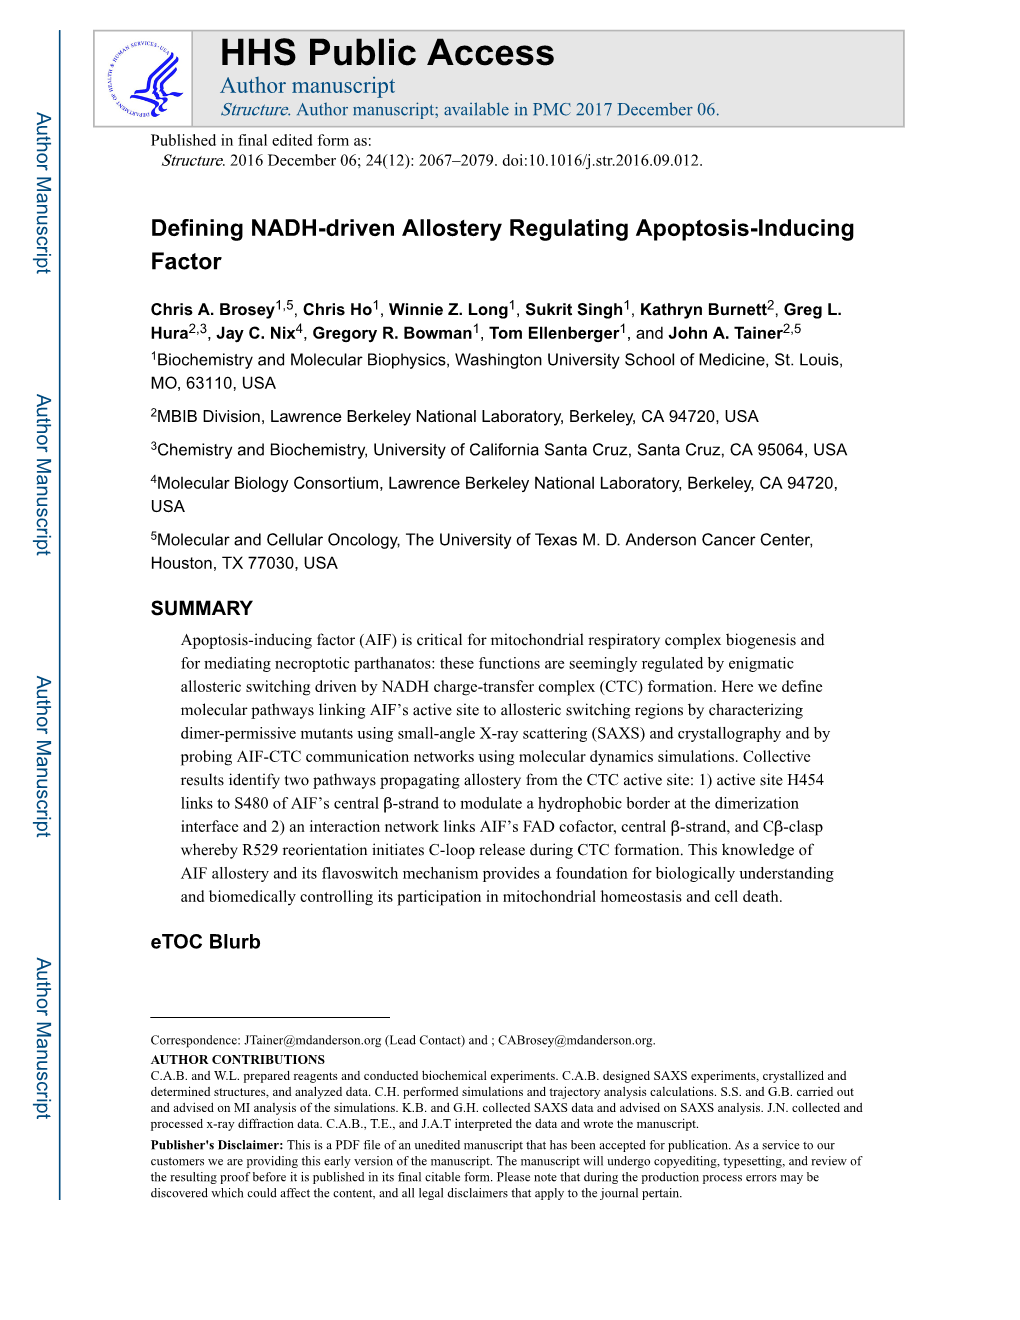 Defining NADH-Driven Allostery Regulating Apoptosis-Inducing Factor